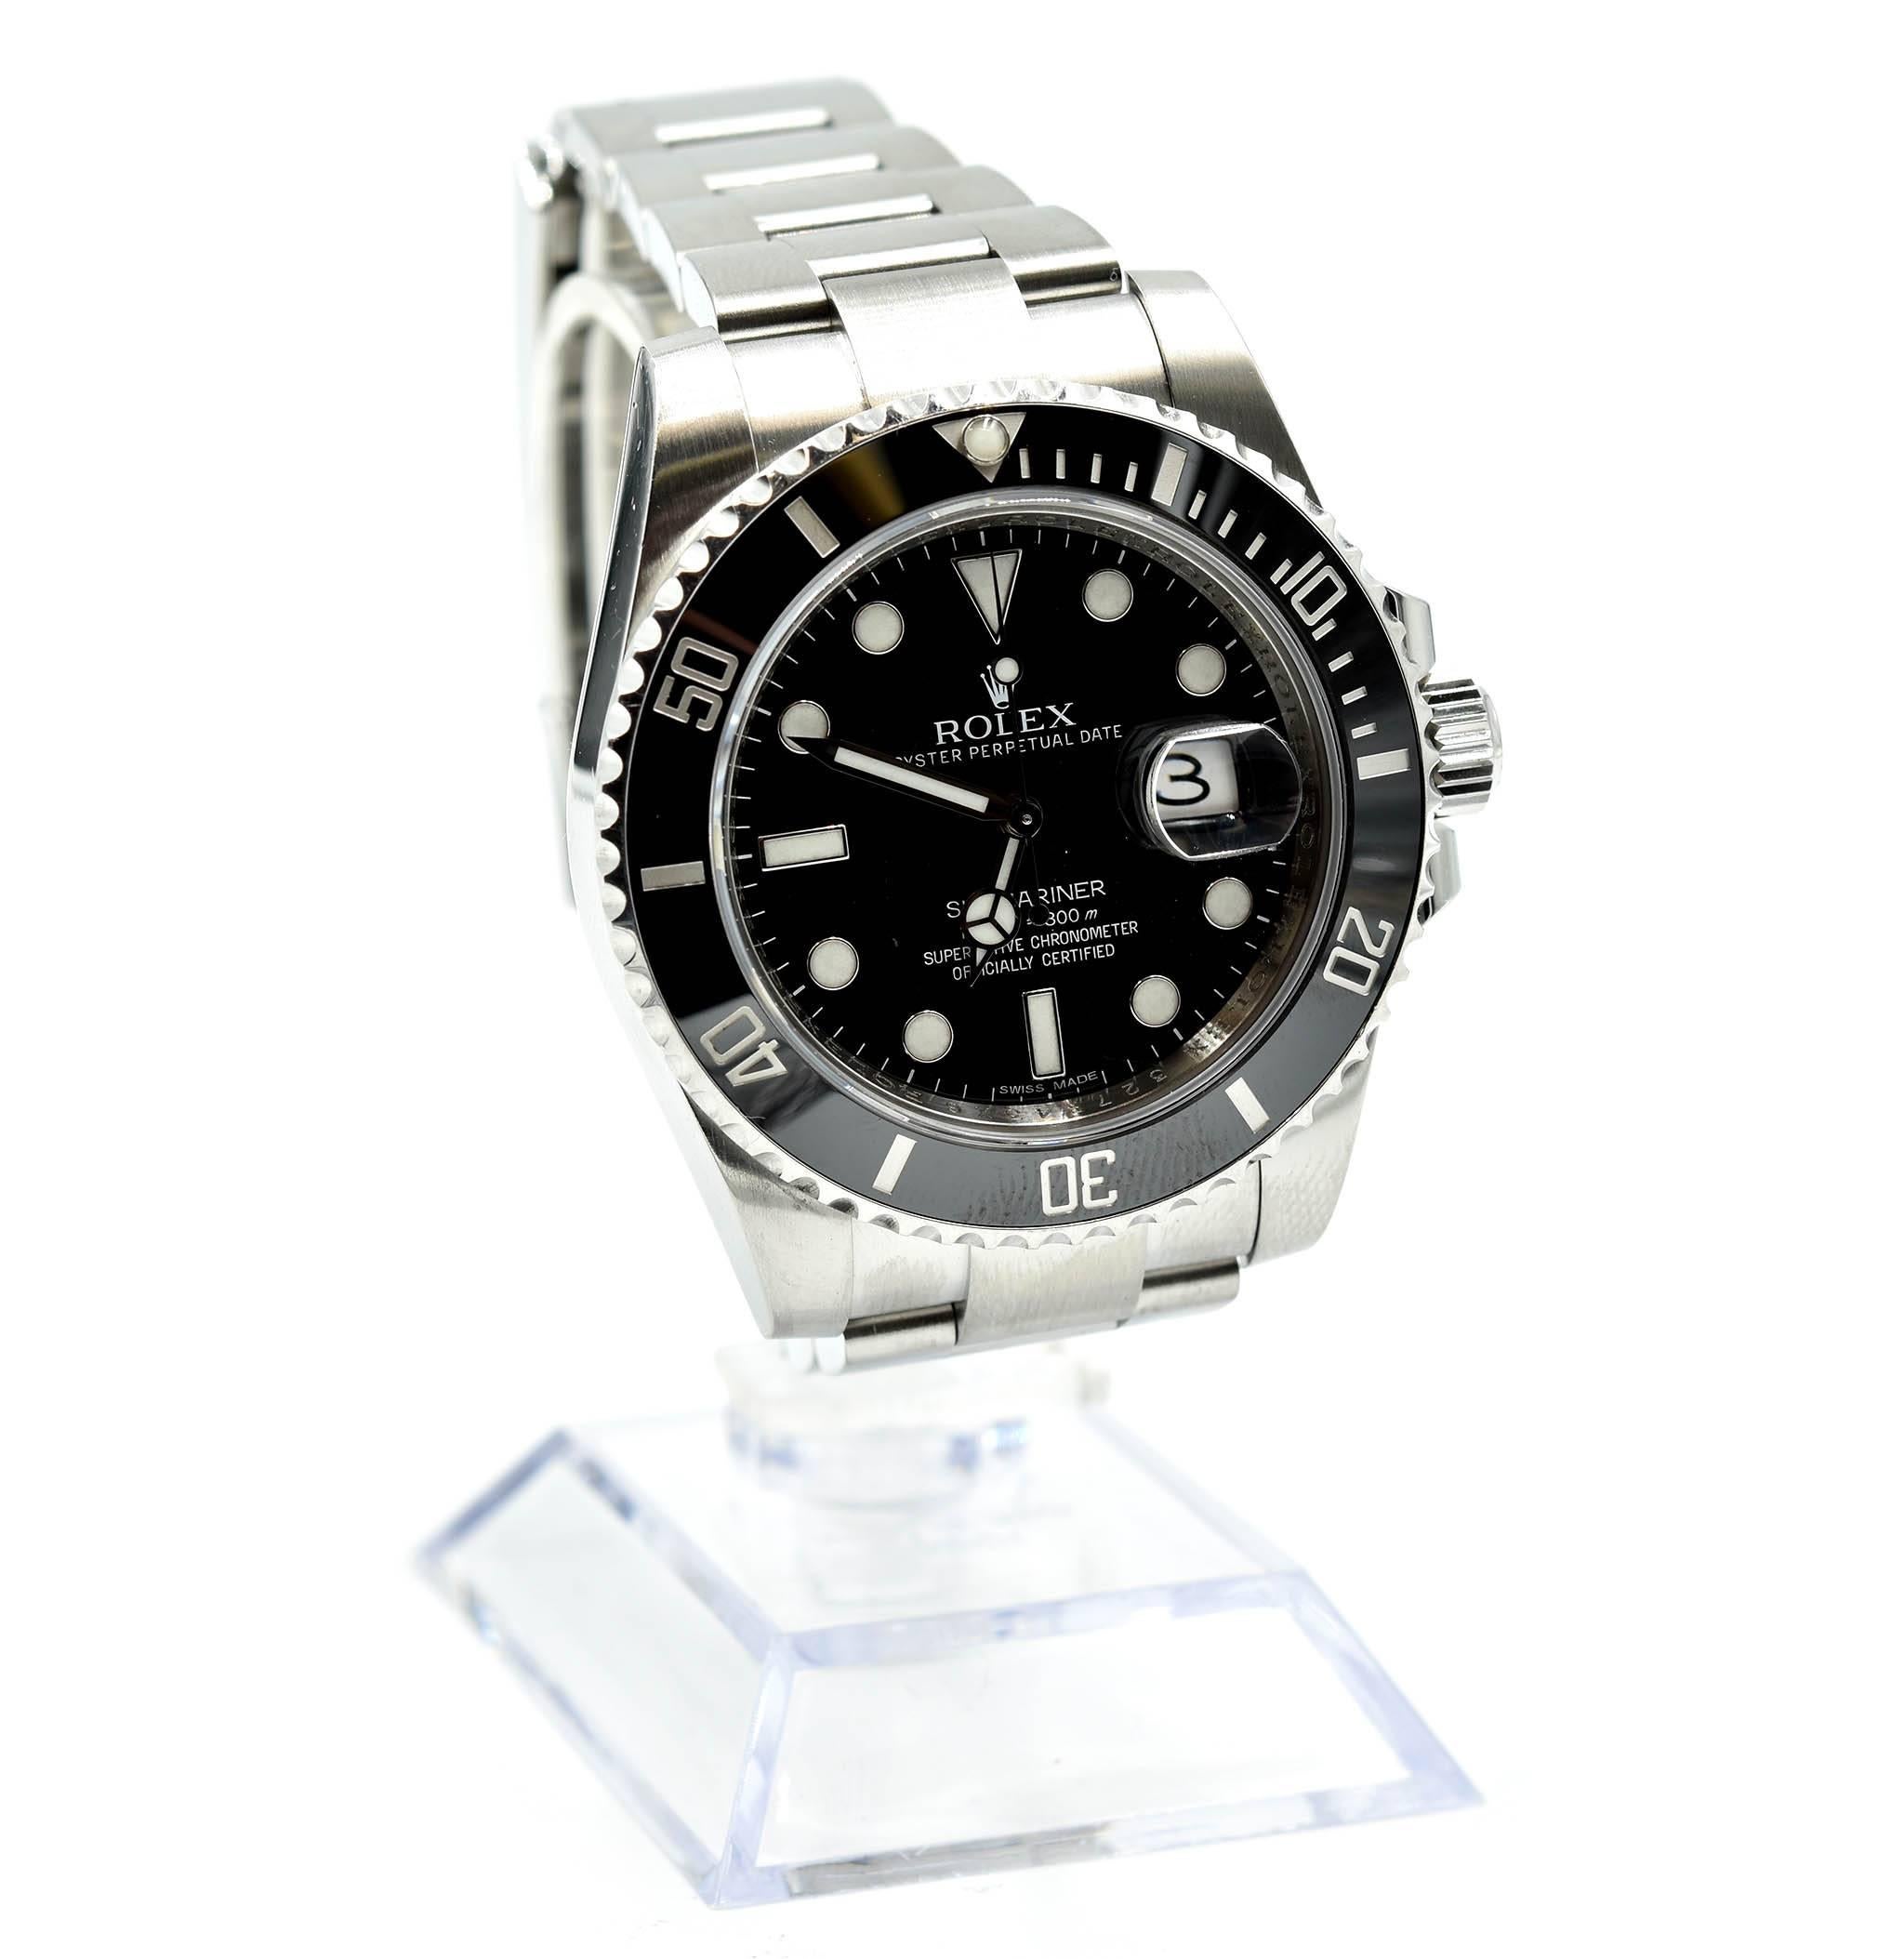 Movement: automatic
Function: hours, minutes, seconds, date
Case: round 40mm stainless steel case, stainless steel & black ceramic dive bezel, screw-down crown, scratch resistant sapphire crystal, waterproof to 300 meters
Band: stainless steel